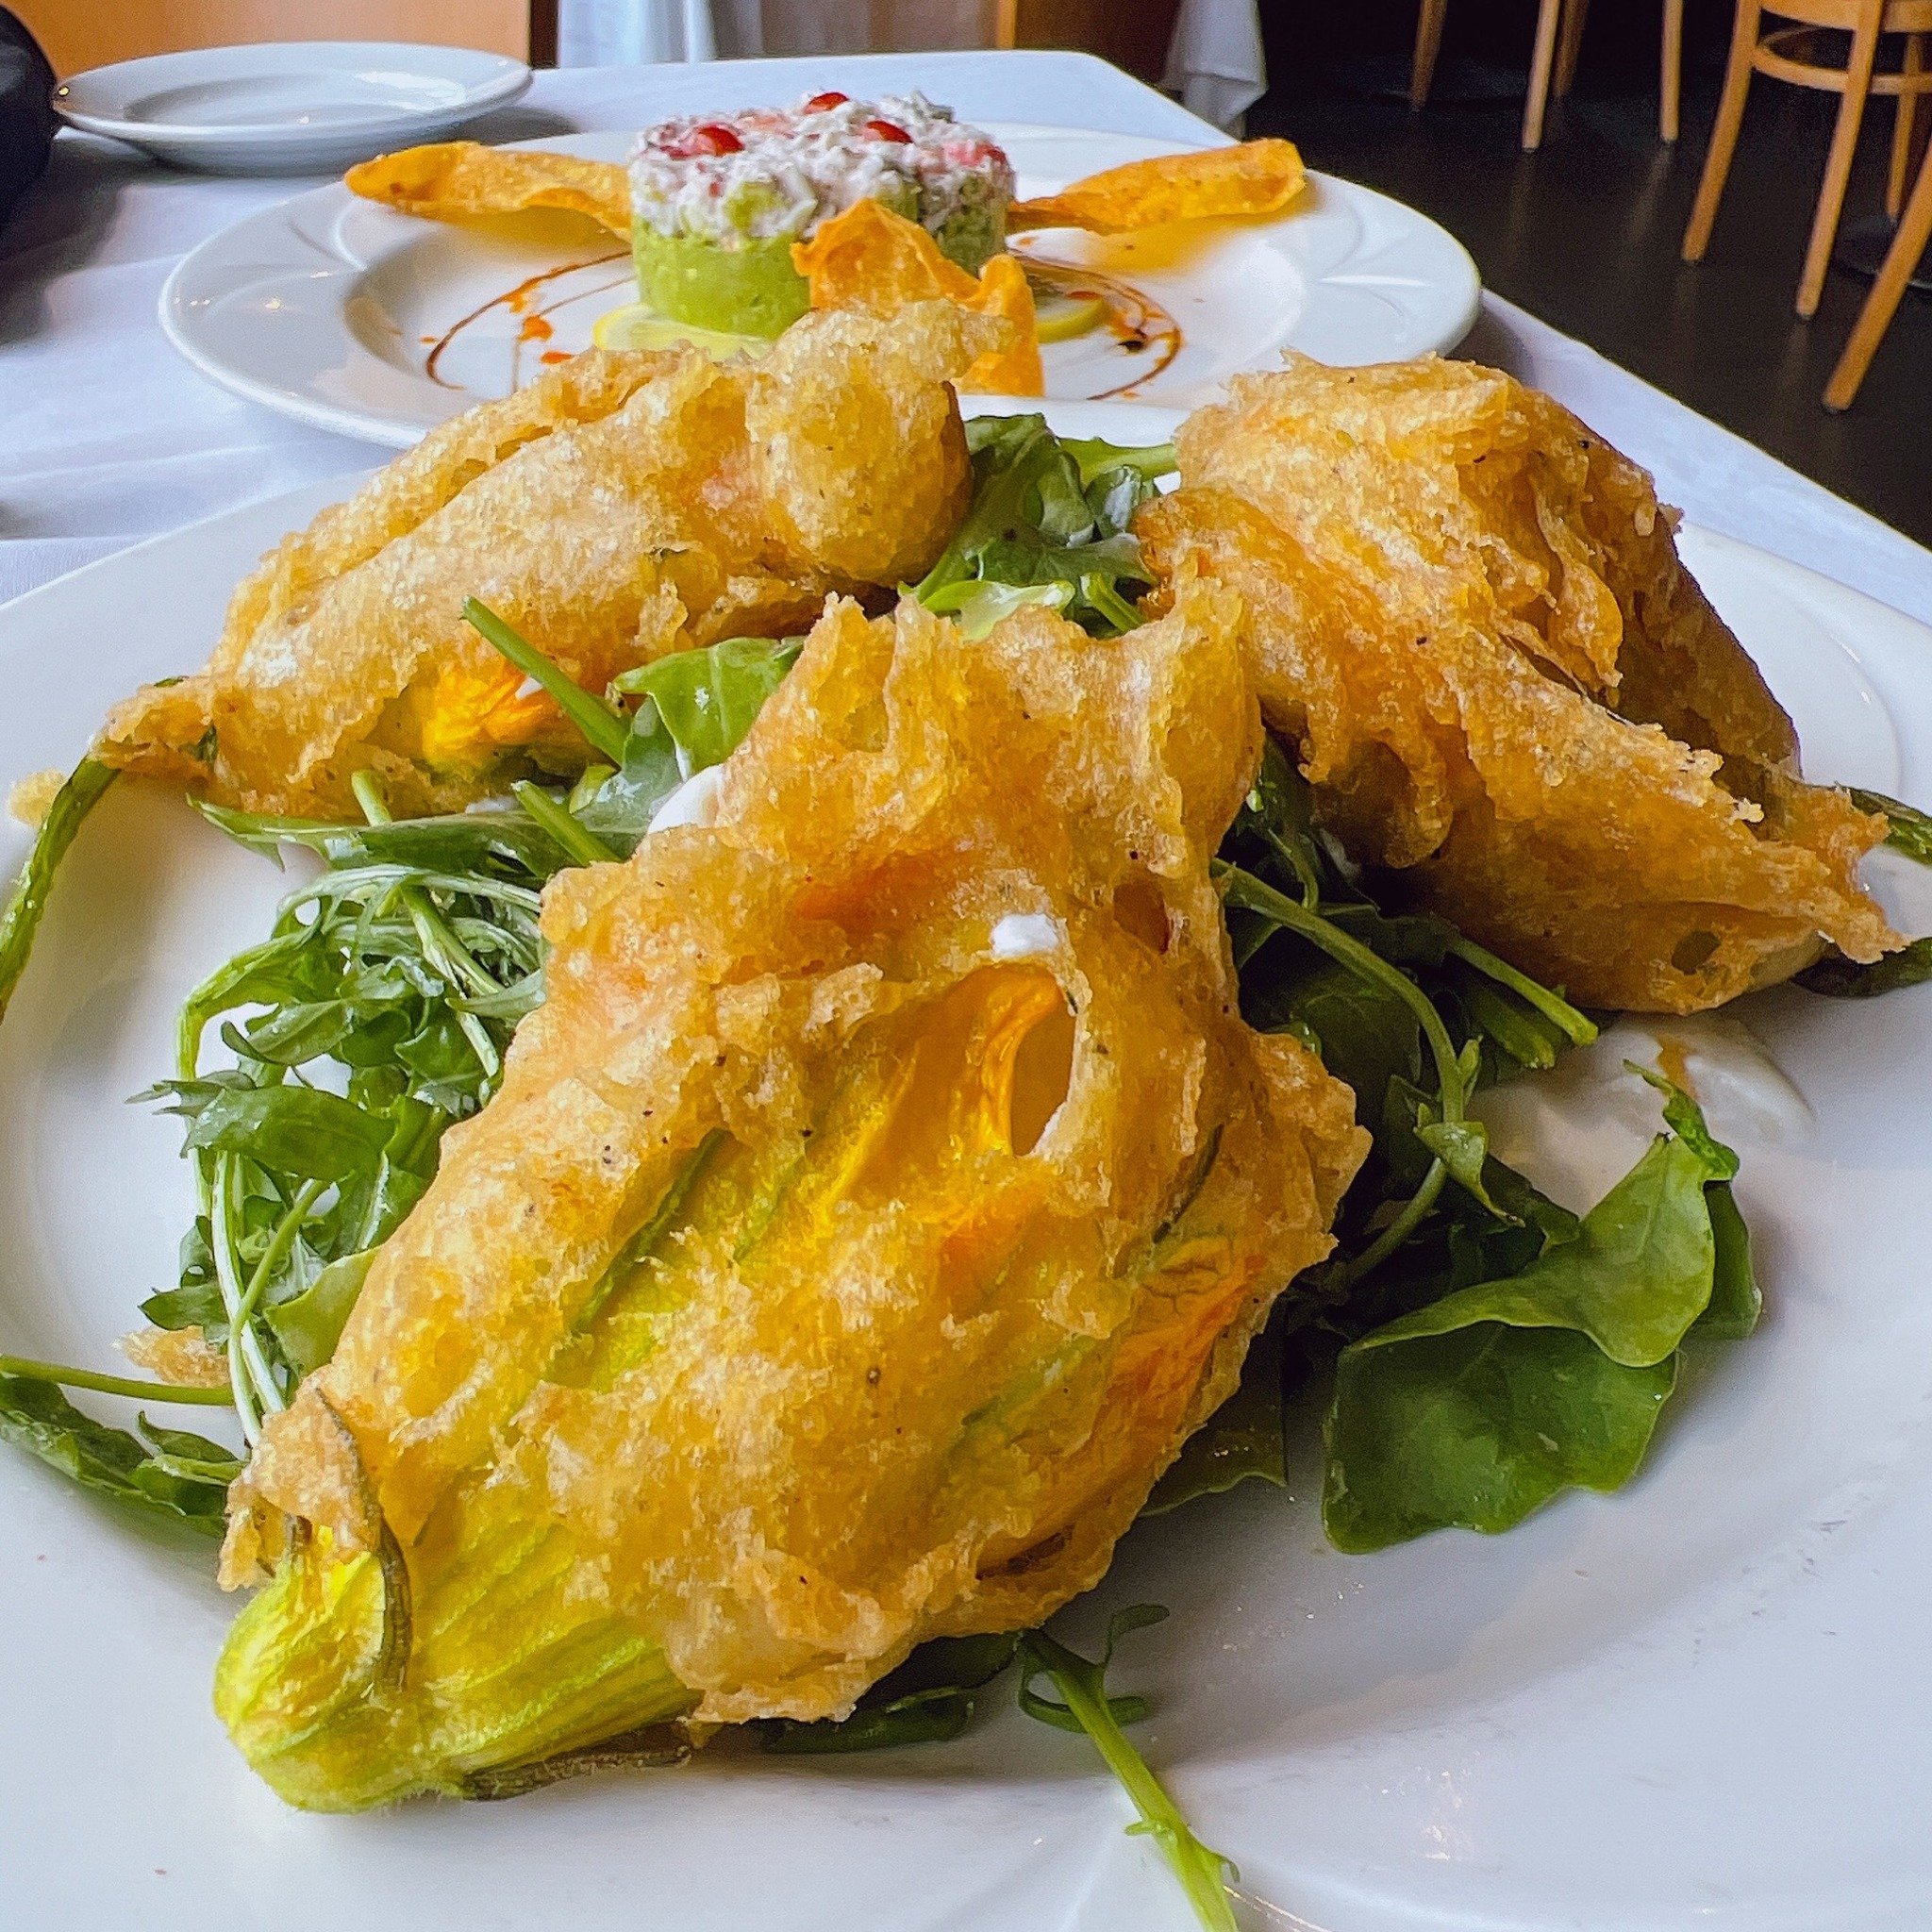 YOU KNOW WHAT THEY SAY!

April showers&hellip; bring May ZUCCHINI FLOWERS 🌸 

Stuffed with goat cheese, ricotta &amp; bacon&hellip; these lil guys are the perfect pre-game to an epic dinner

#njfoodie #foodie #foooodieee #njfood #foodies #njrestaura